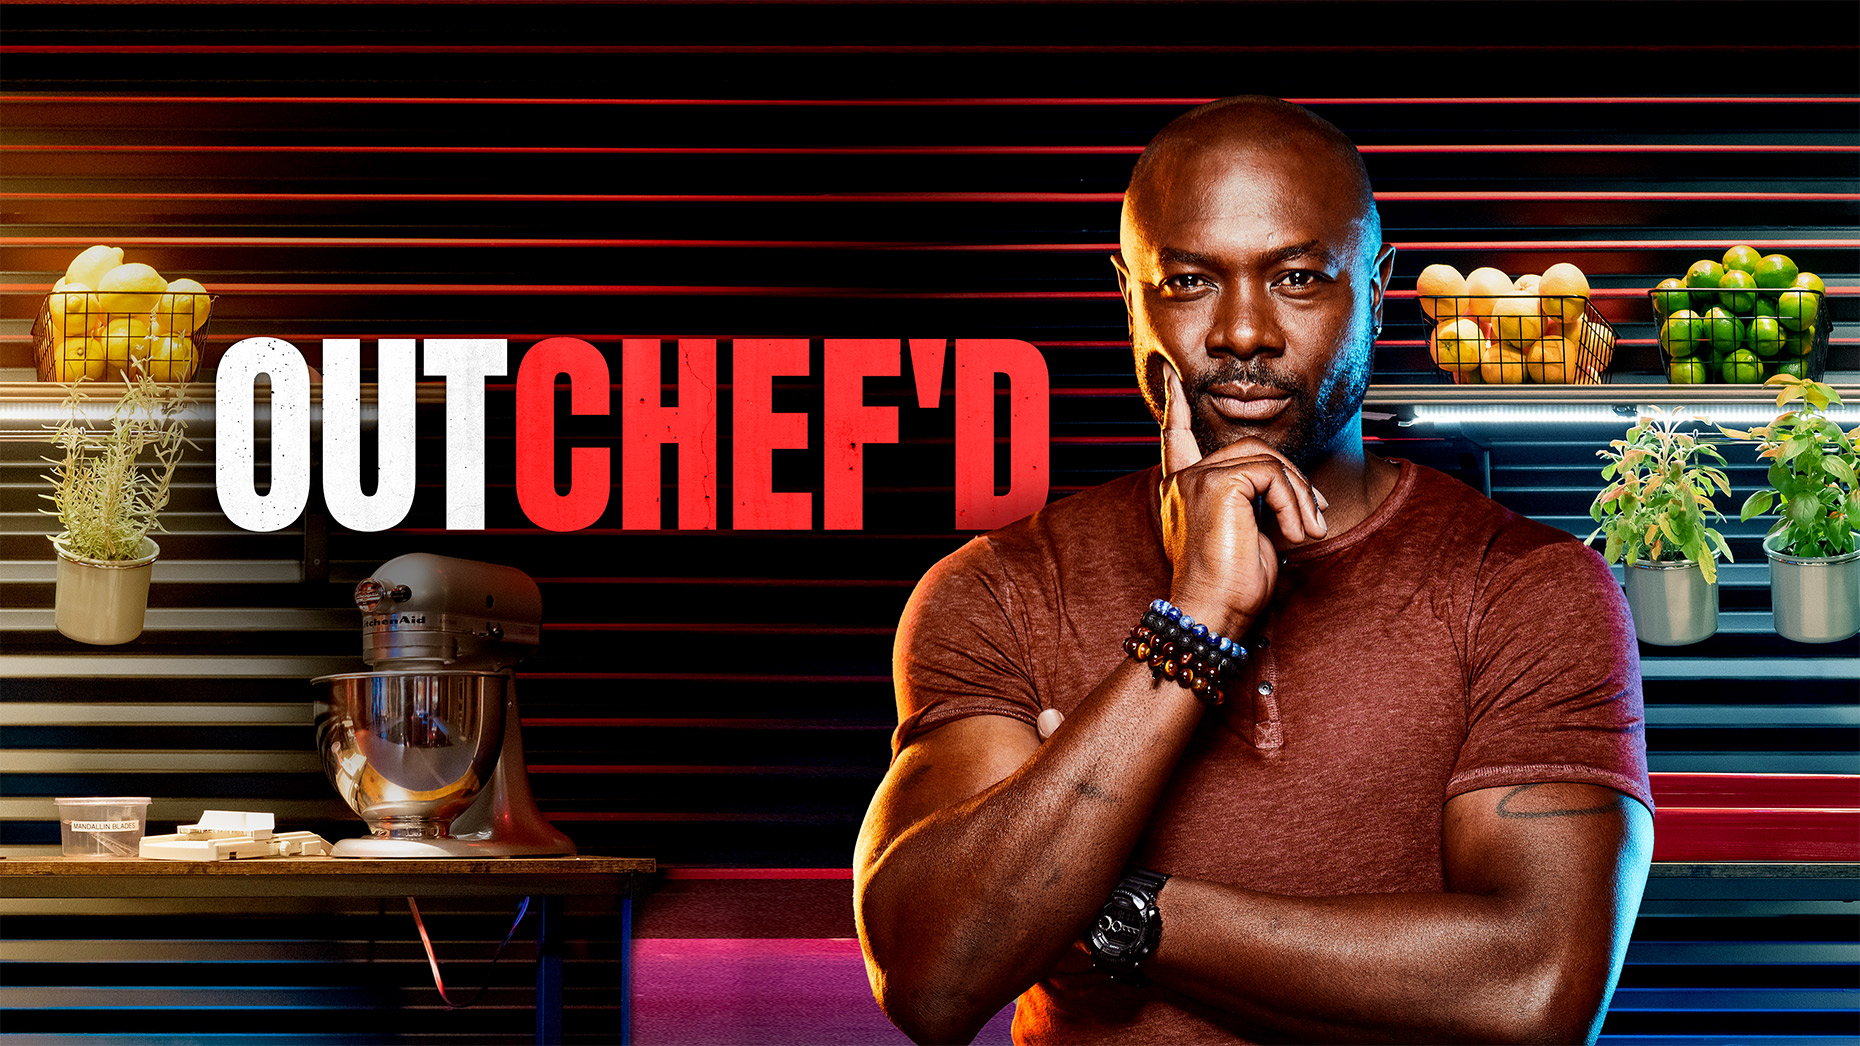 Outchefd-S1-V1-3840x2160_Cover_Art